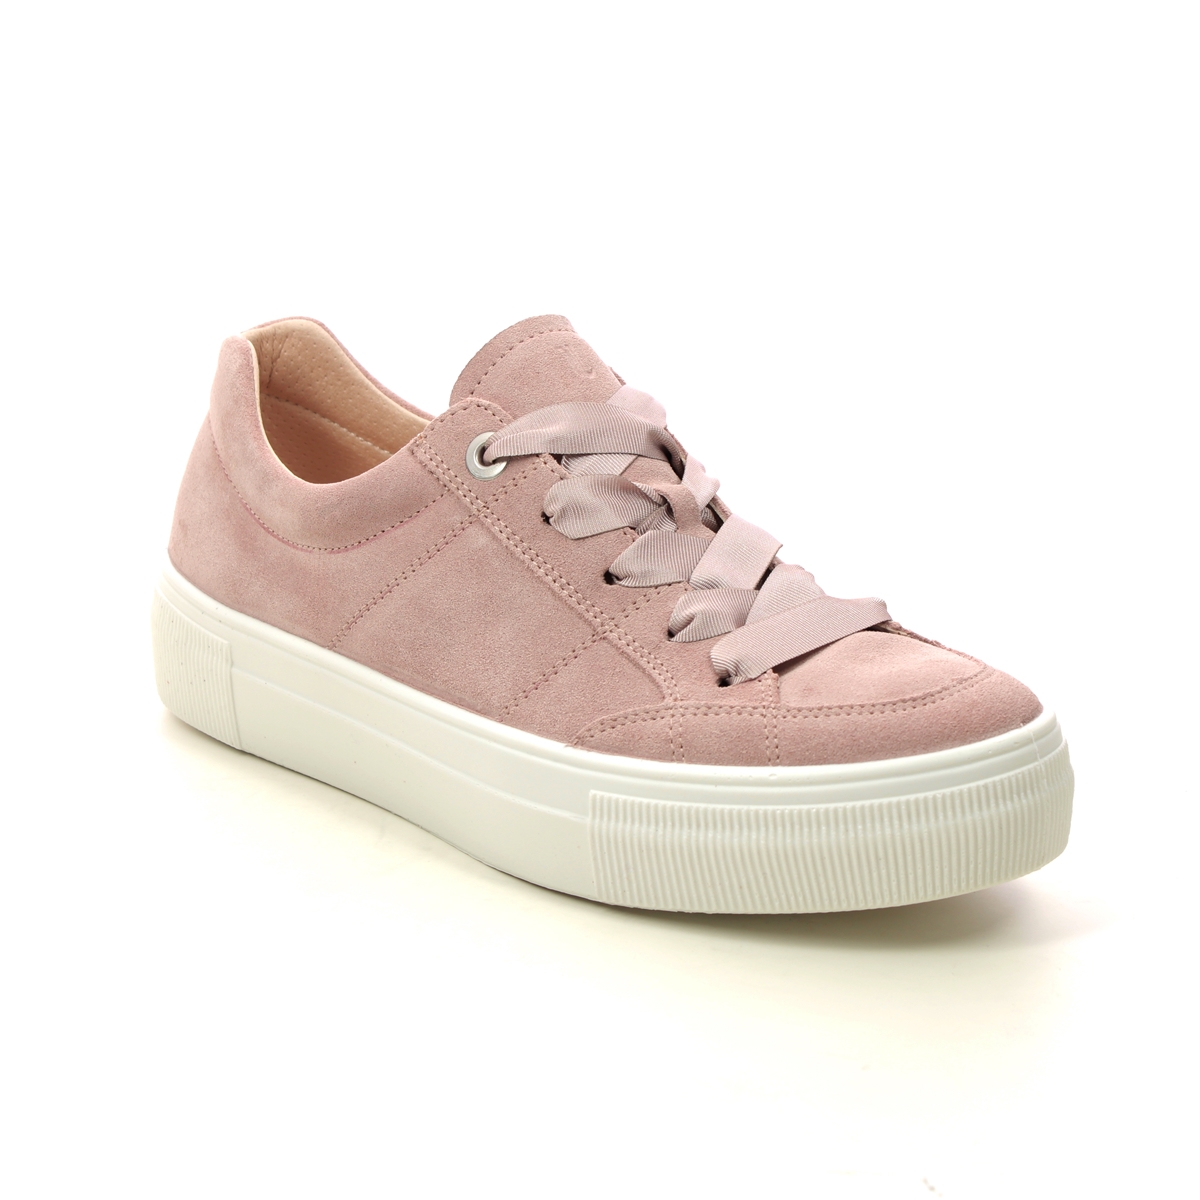 Legero Lima Stitch Pink suede Womens trainers 0600910-5600 in a Plain Leather in Size 38